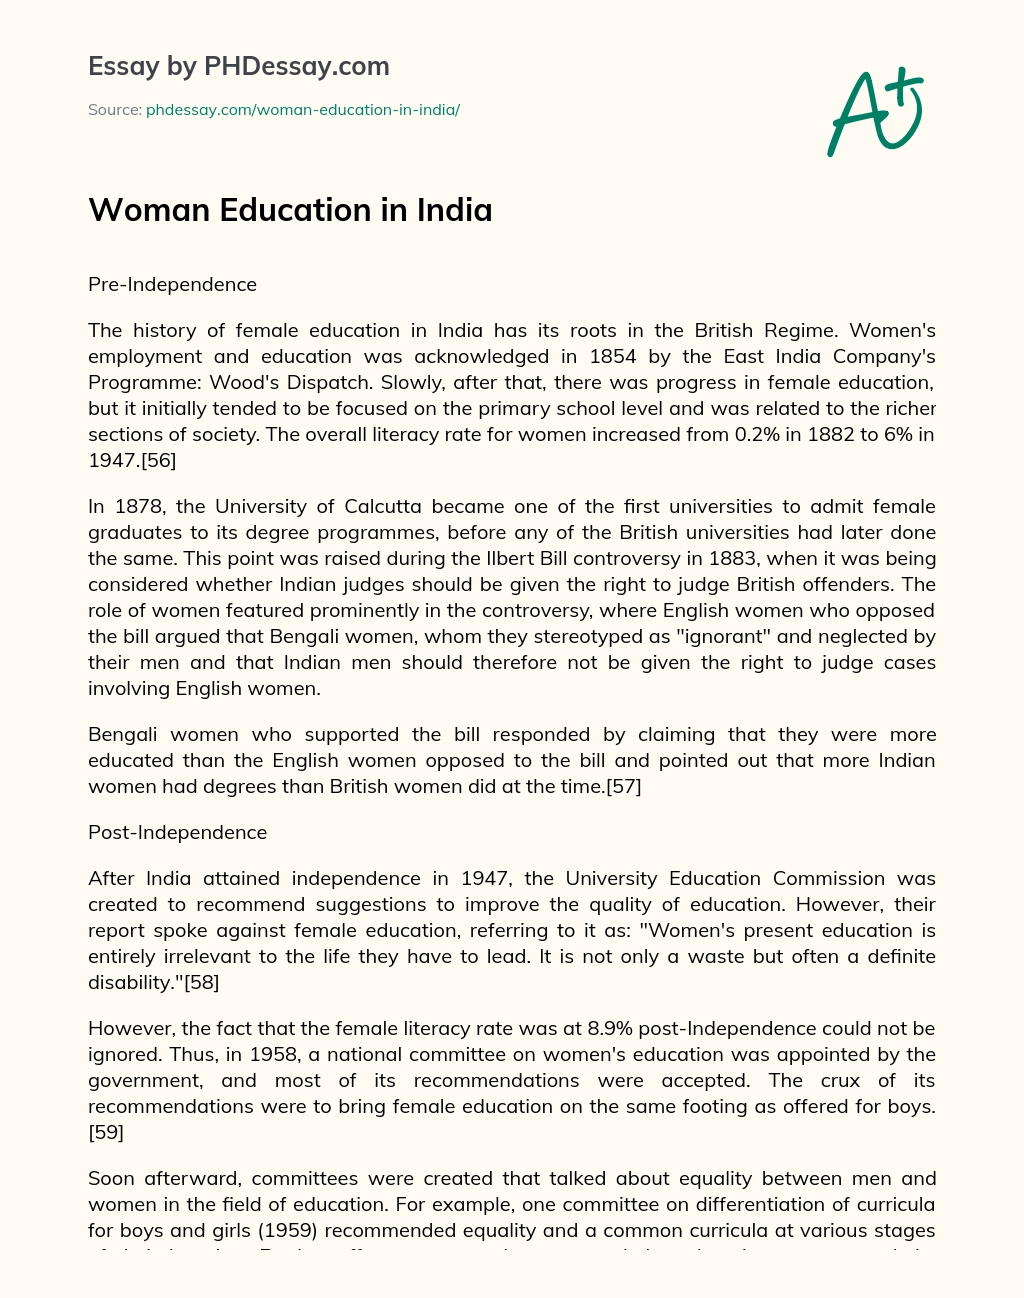 Woman Education in India essay